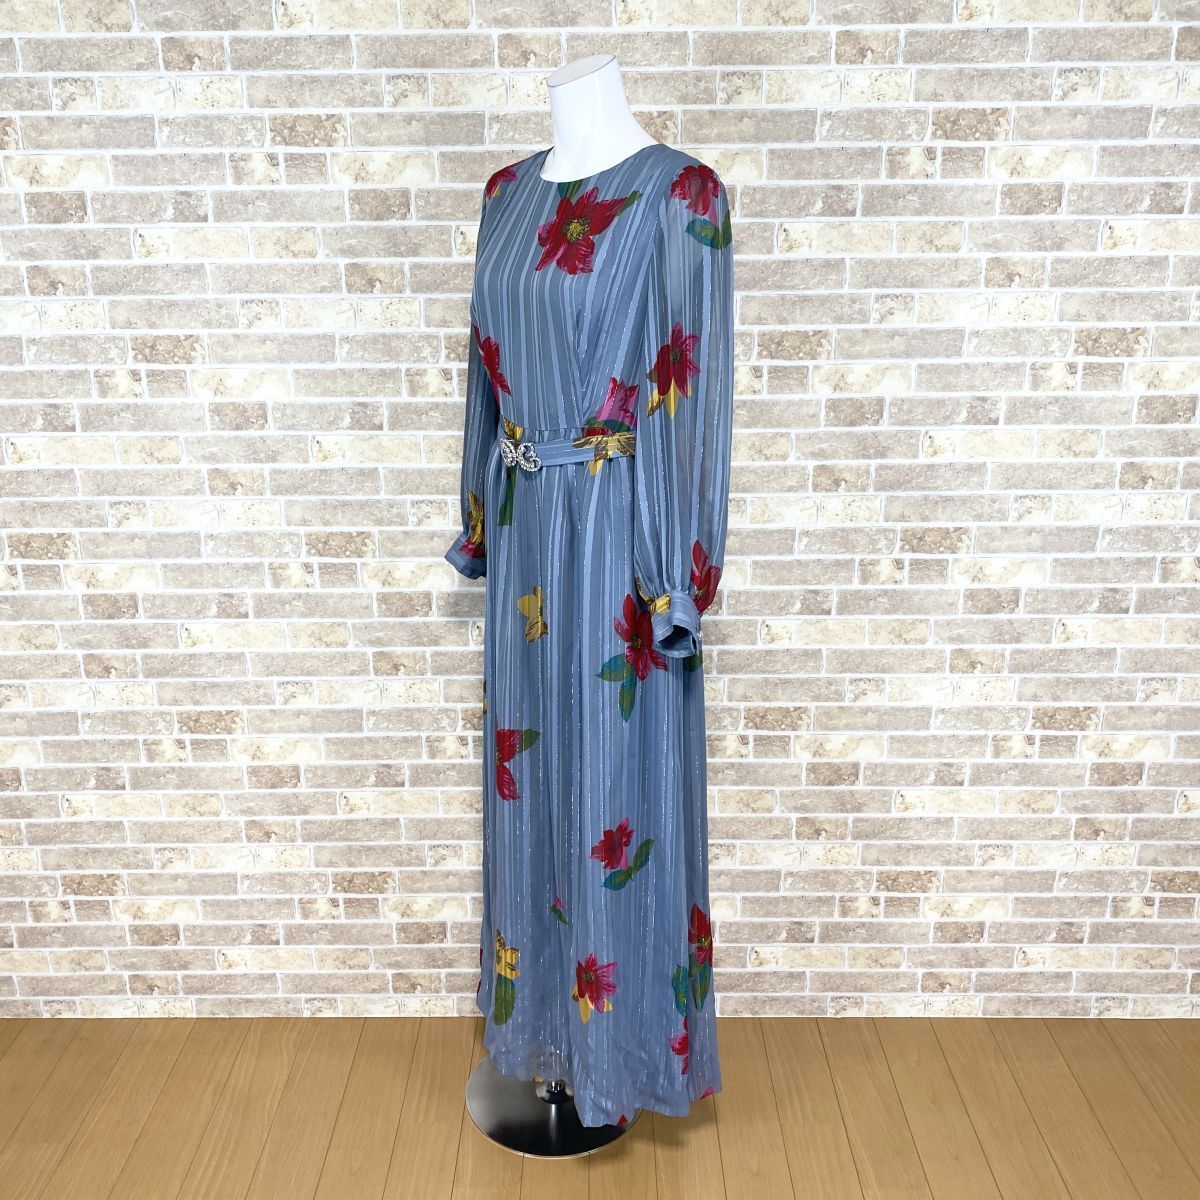 1 jpy dress Mai pcs costume long dress blue gray pattern shoulder pad . product? party dress color dress Event used 4313